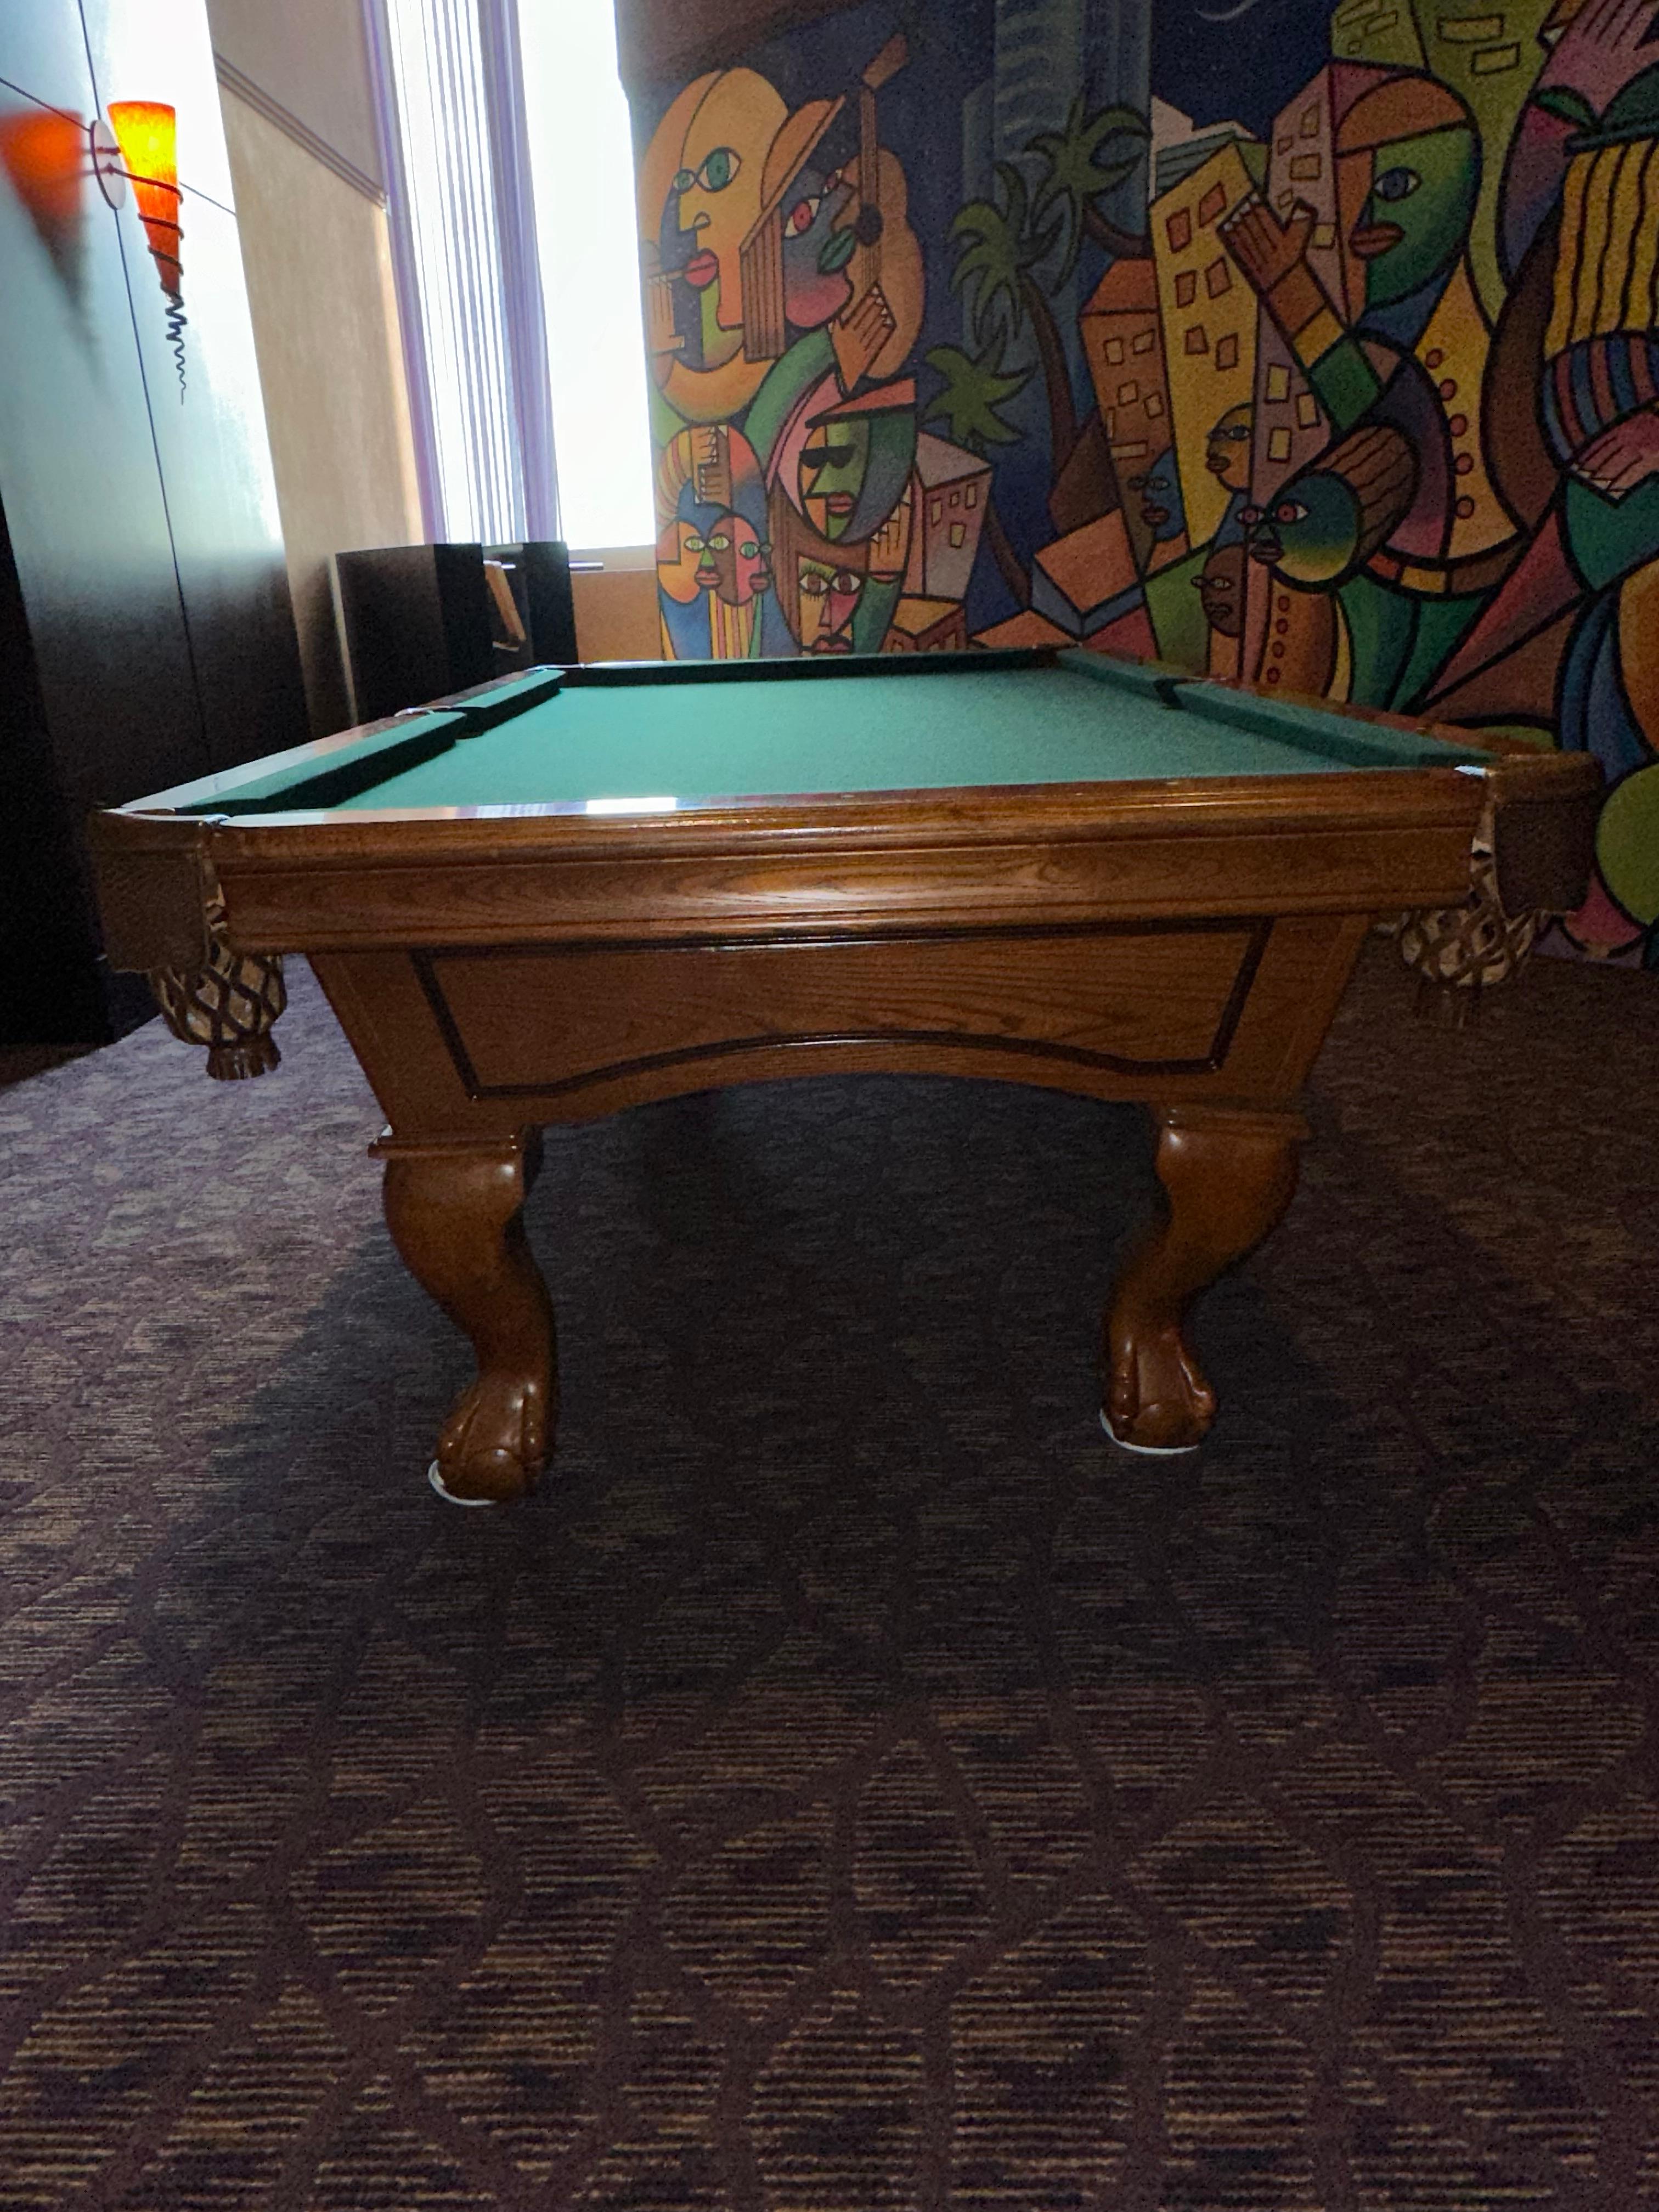 100"L x 55.5"D x 32"H Decor Solid Wood Green Felt Pool Table w/Dark Brown Leather Cover